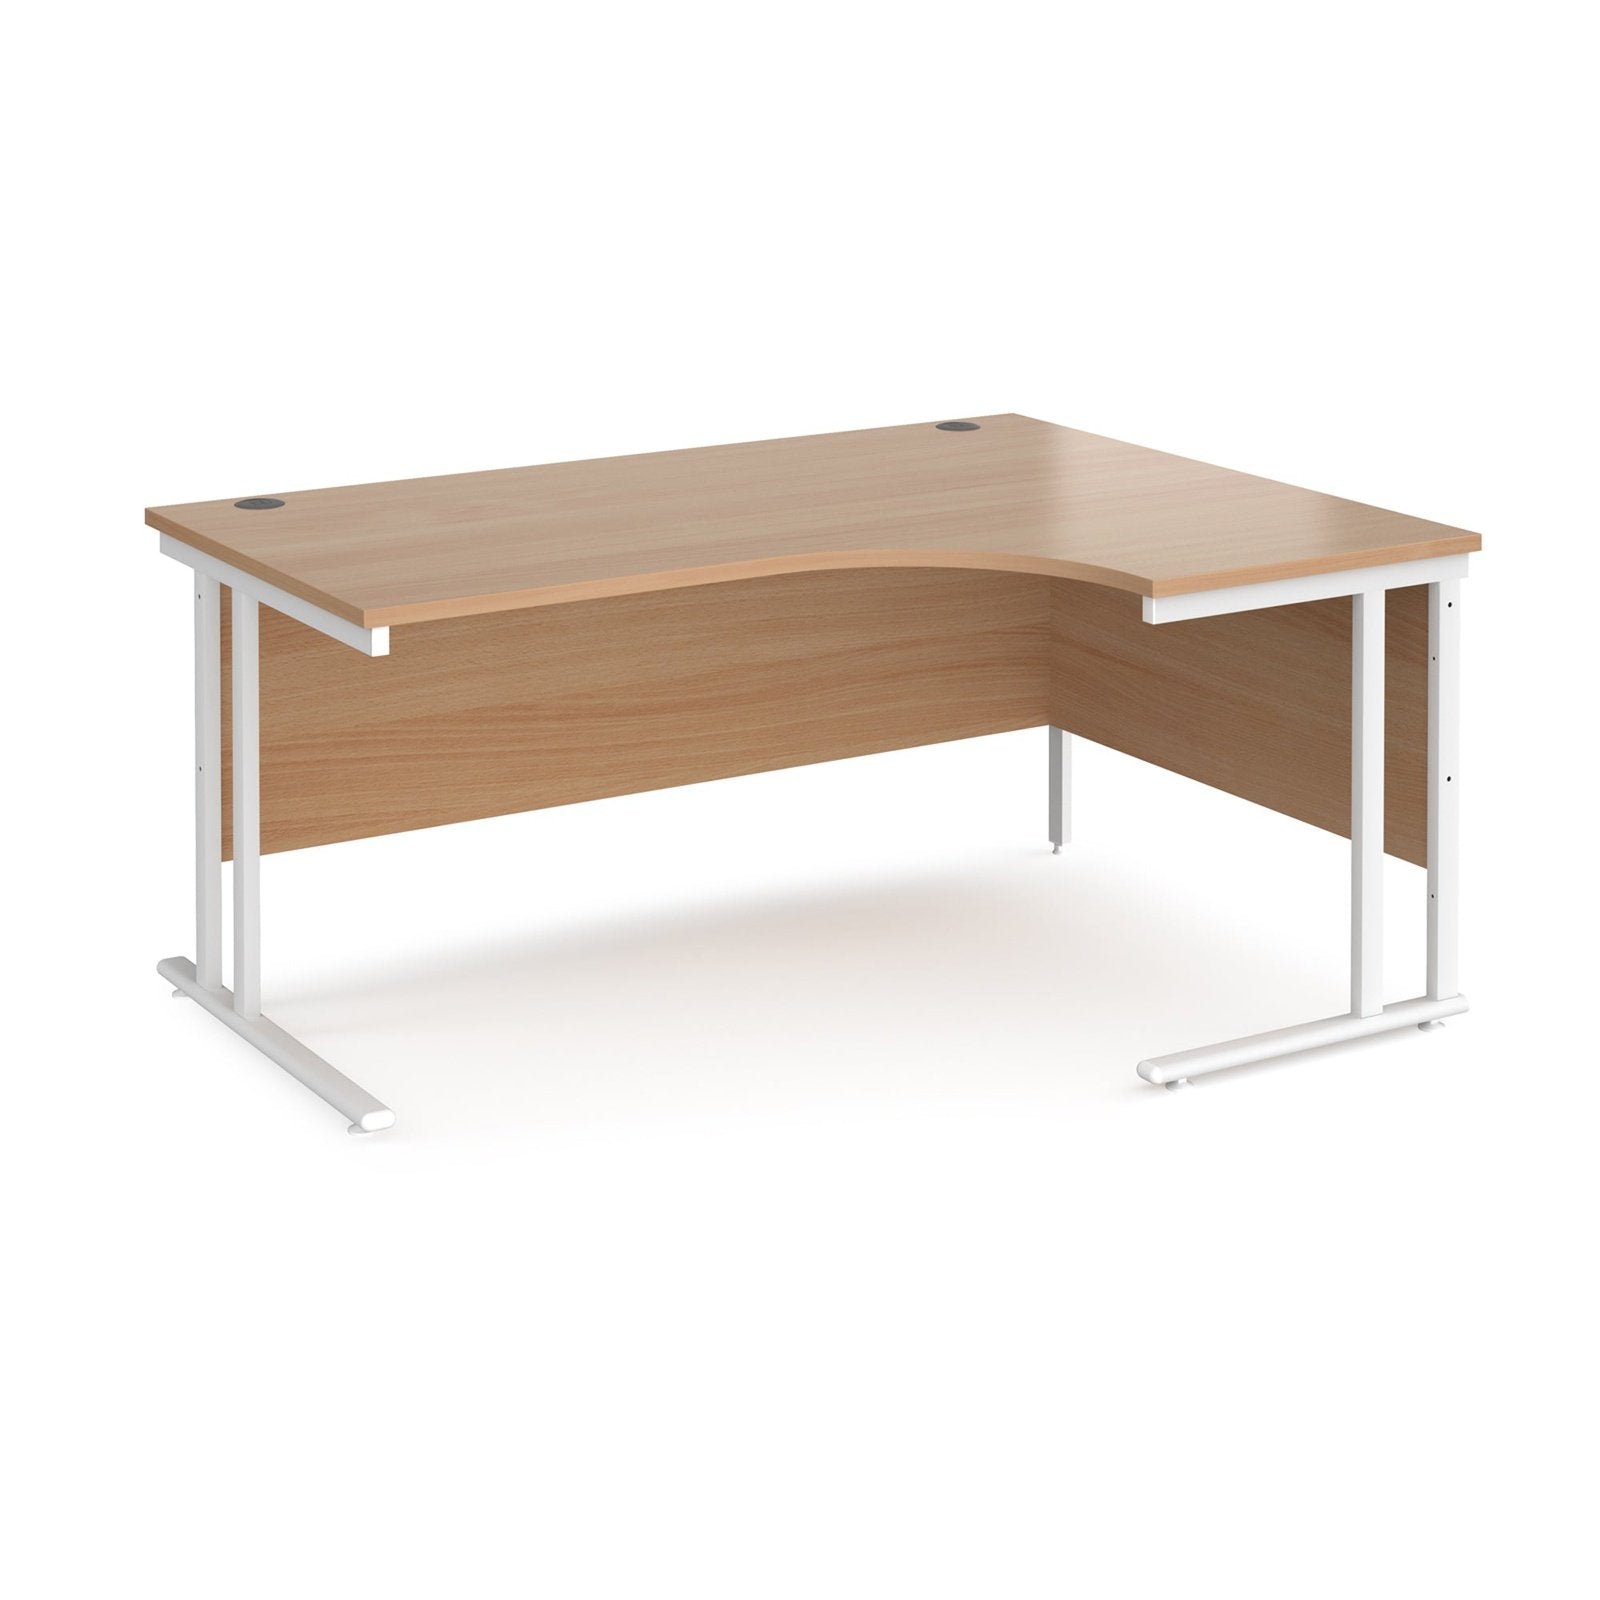 Maestro 25 cantilever leg right hand ergonomic desk - Office Products Online